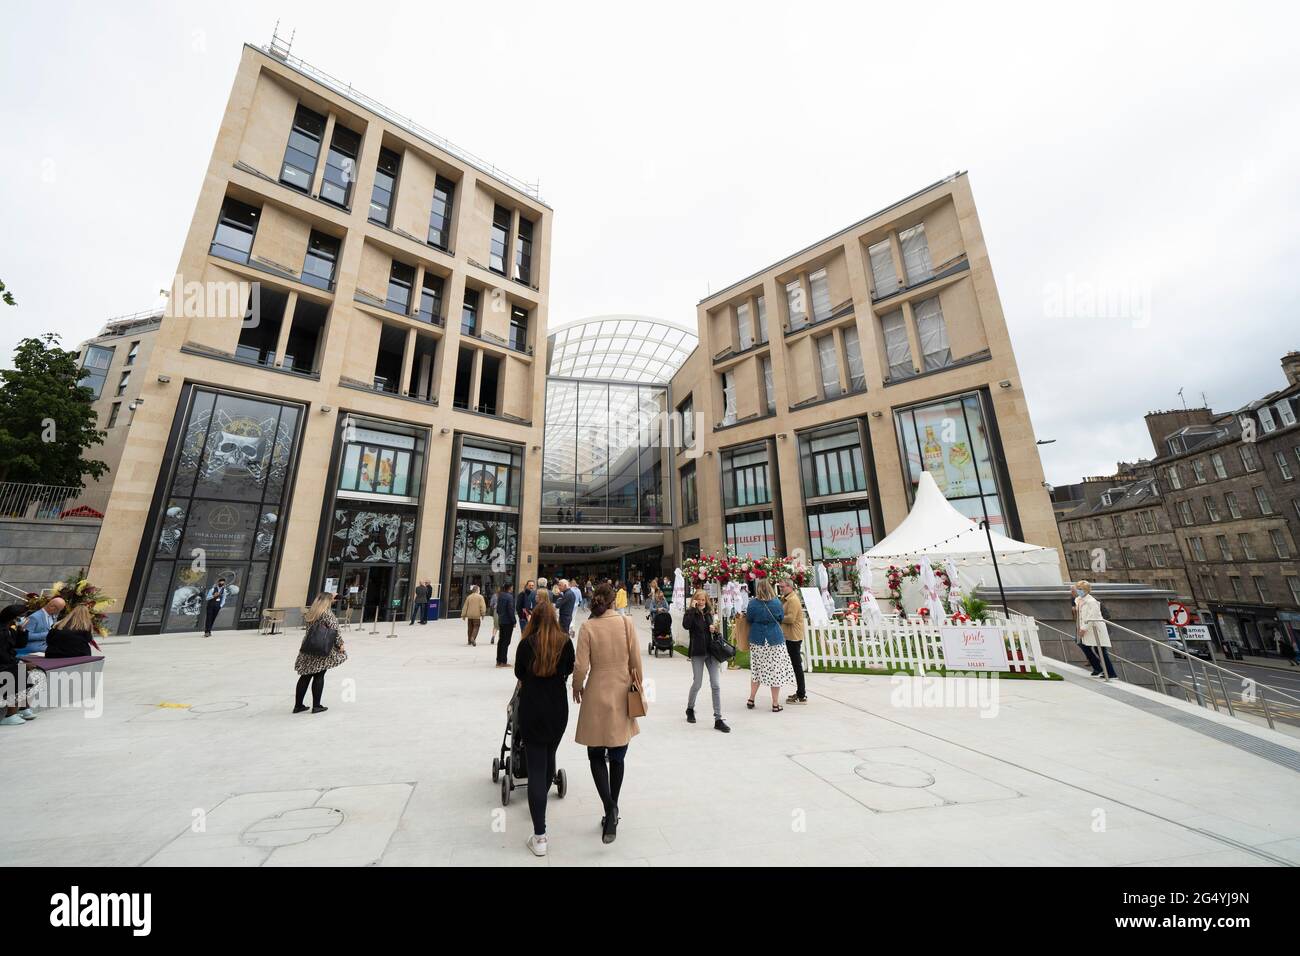 Edinburgh, Scotland, UK. 24 June 2021. First images of the new St James Quarter which opened this morning in Edinburgh. The large retail and residential complex replaced the St James Centre which occupied the site for many years. Pic; General view of entrance to mall from Leith Street.  Iain Masterton/Alamy Live News Stock Photo